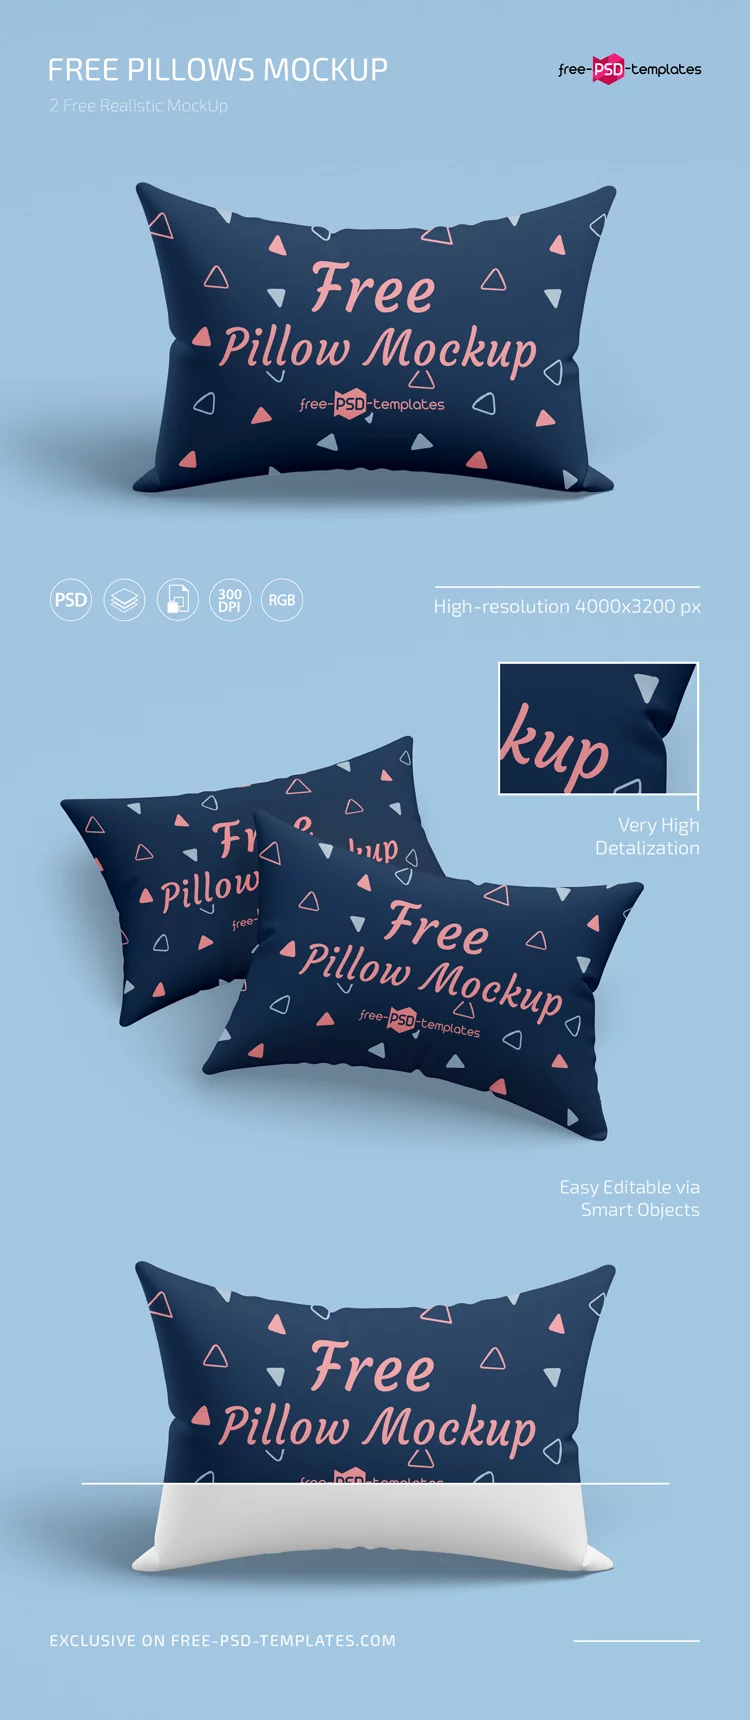 Free Pillows Mockup Template in PSD